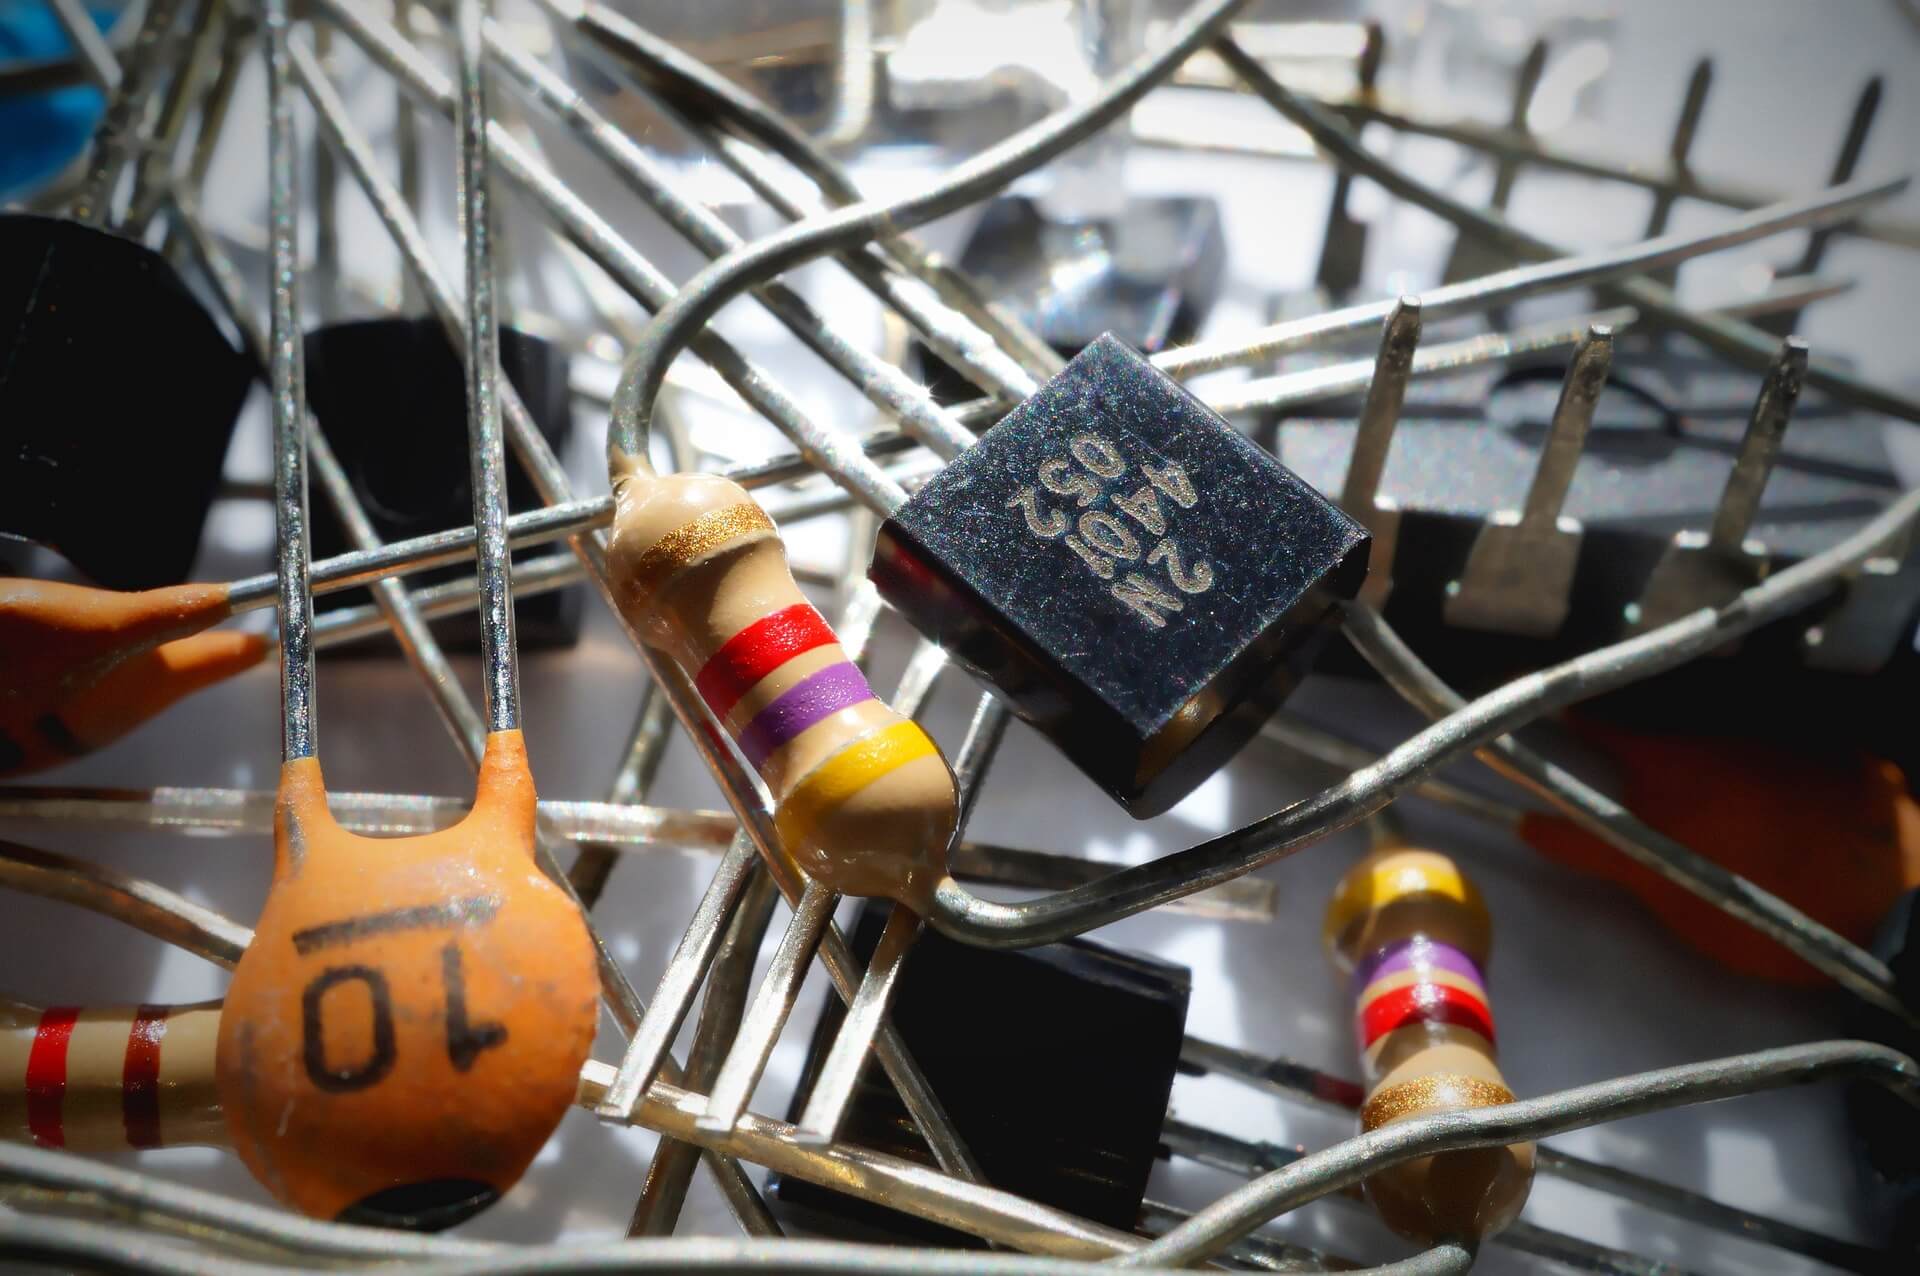 An image of capacitors and other electronic components